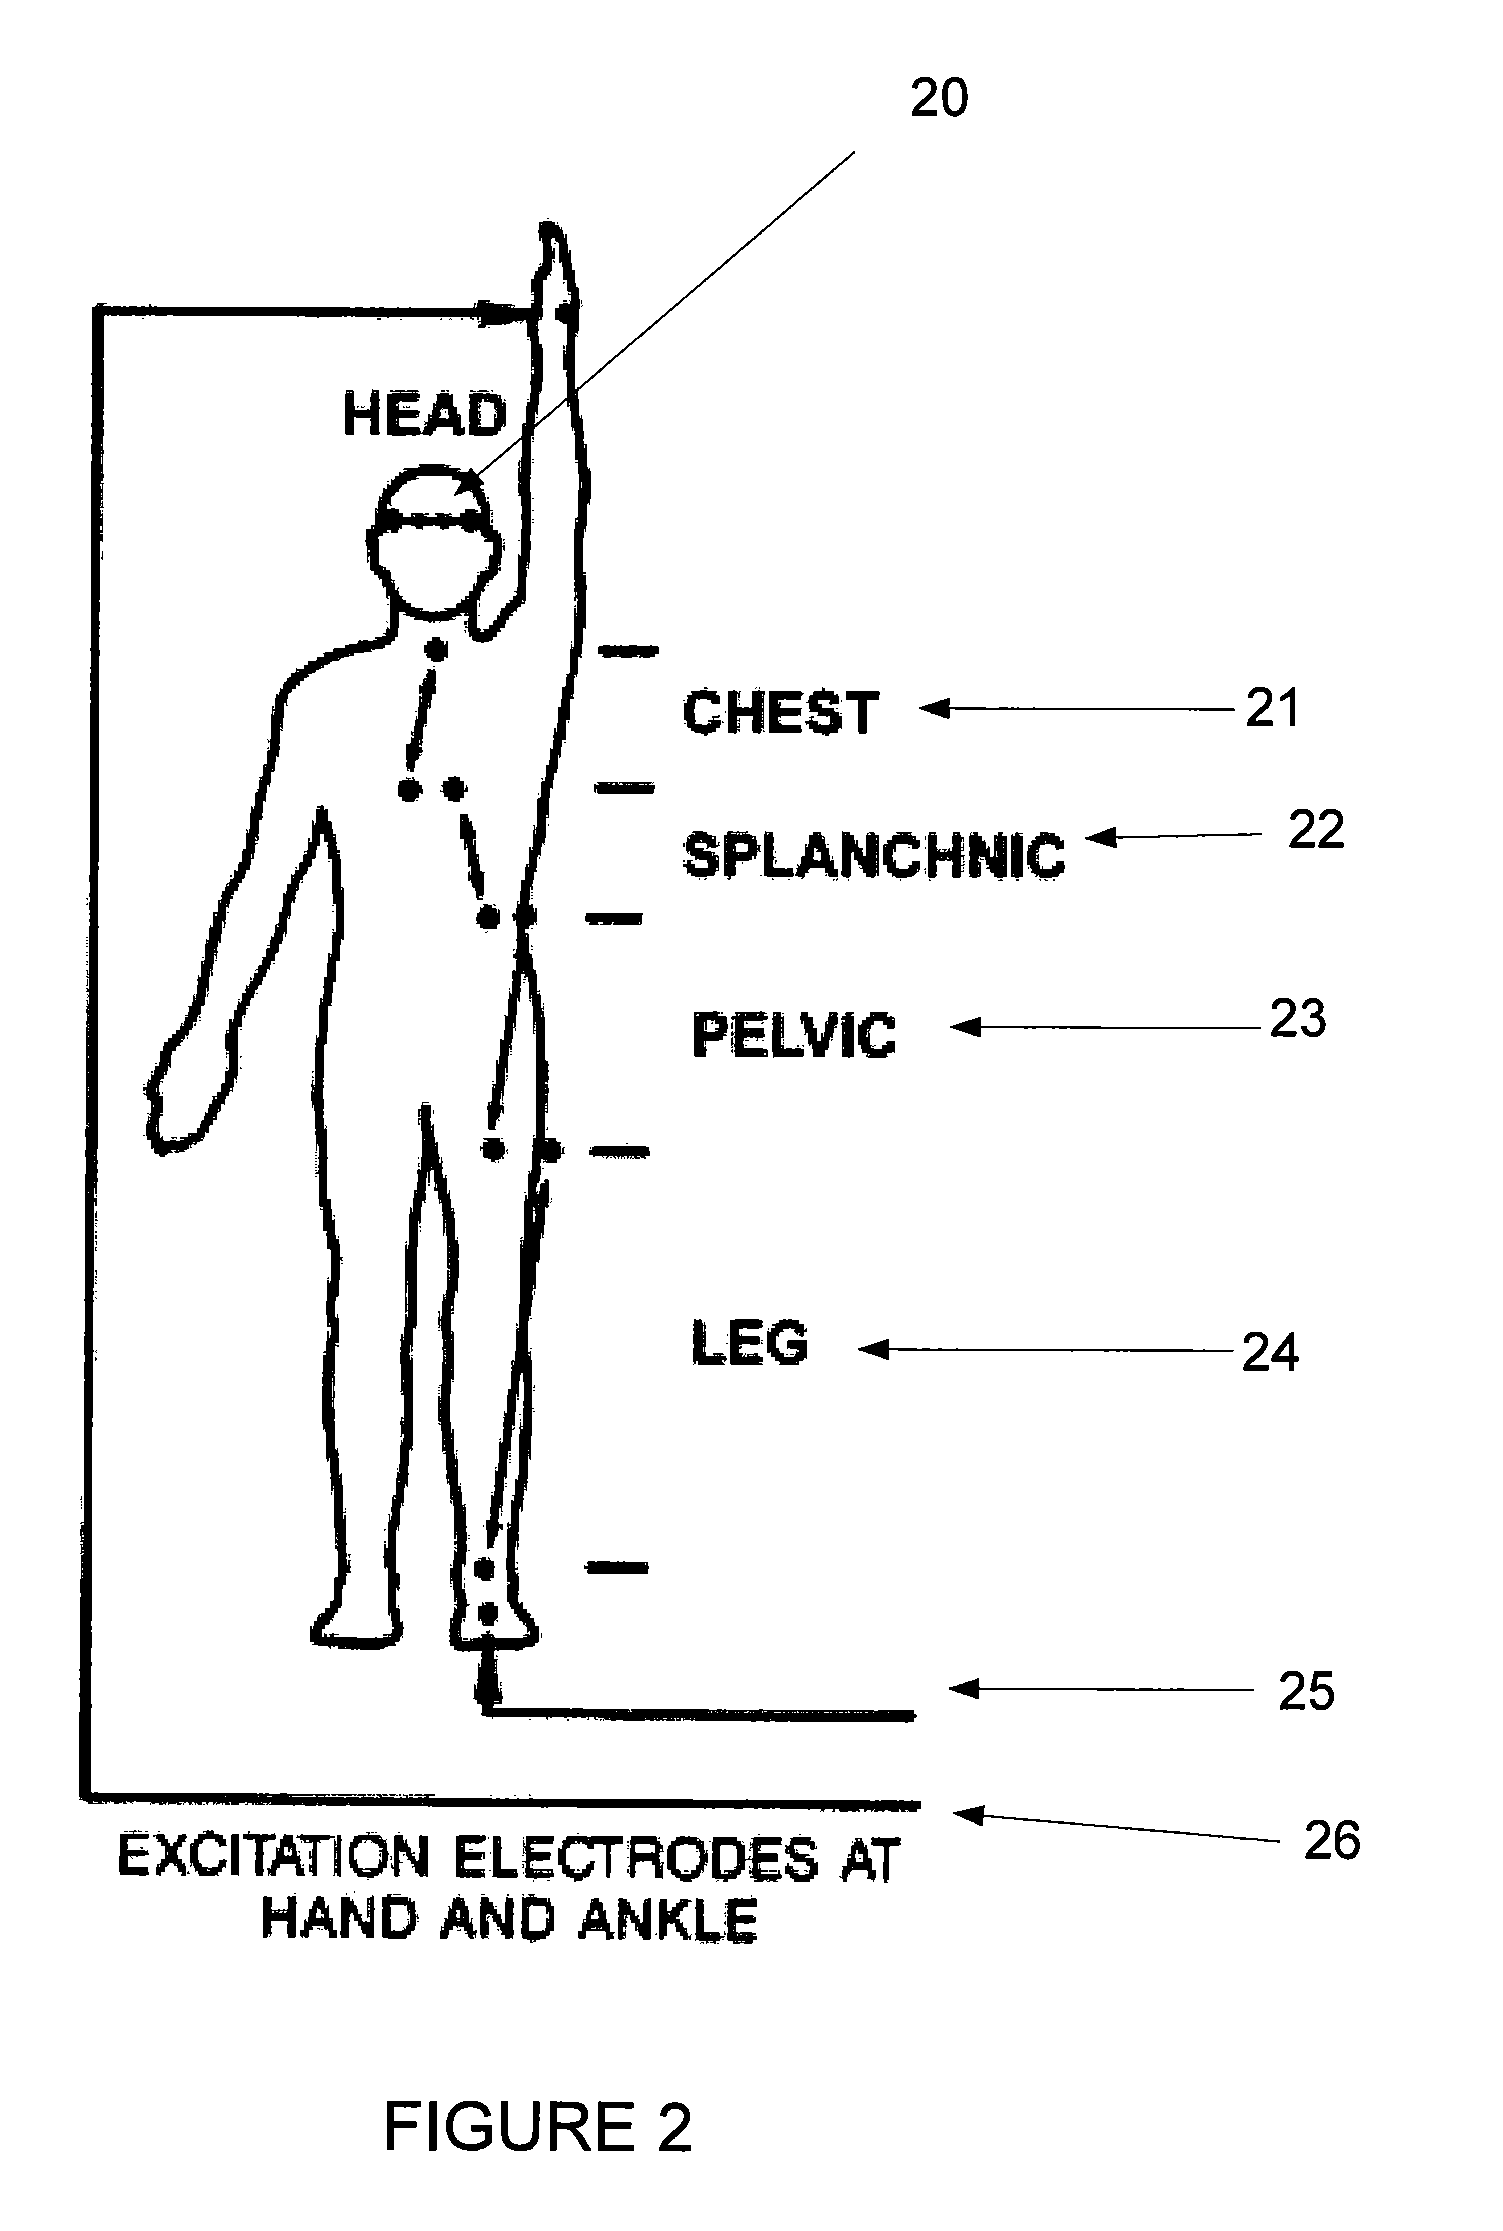 Measurement of physiological characteristics